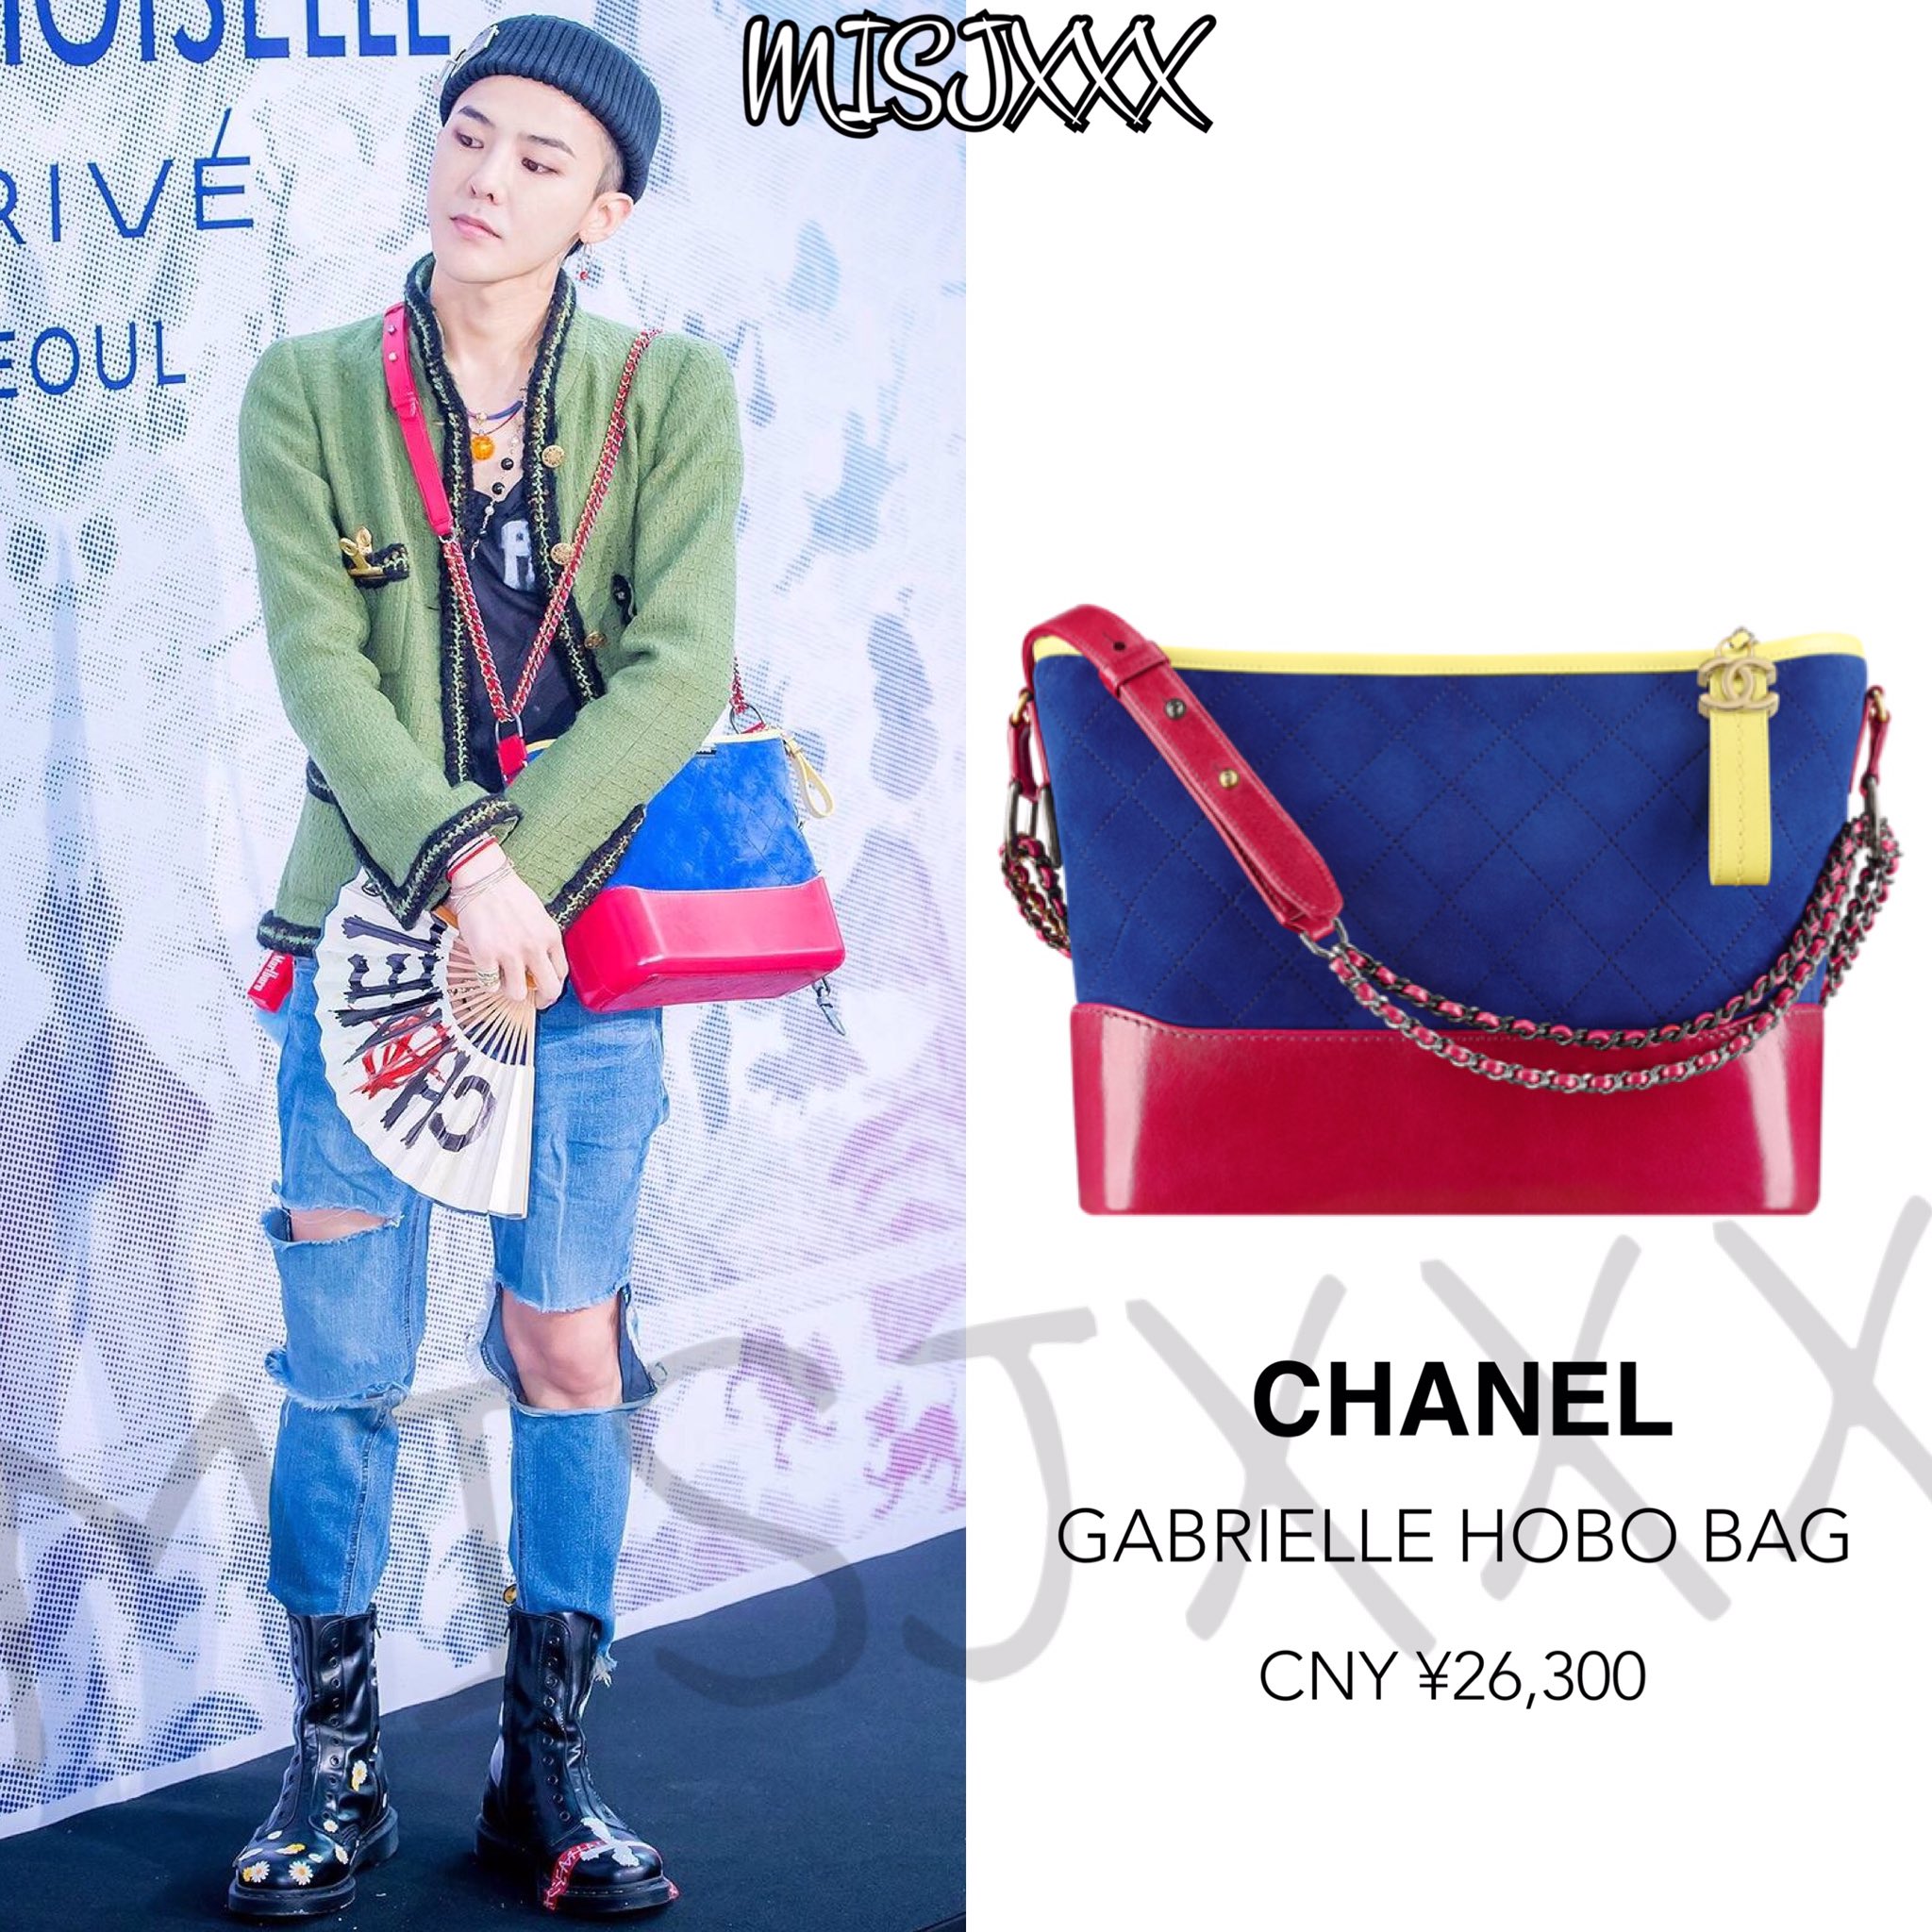 GDSTYLE on X: #GDStyle 👉#CHANEL 'S GABRIELLE HOBO BAG.(CNY ¥26,300)  #gdragon #gd  / X